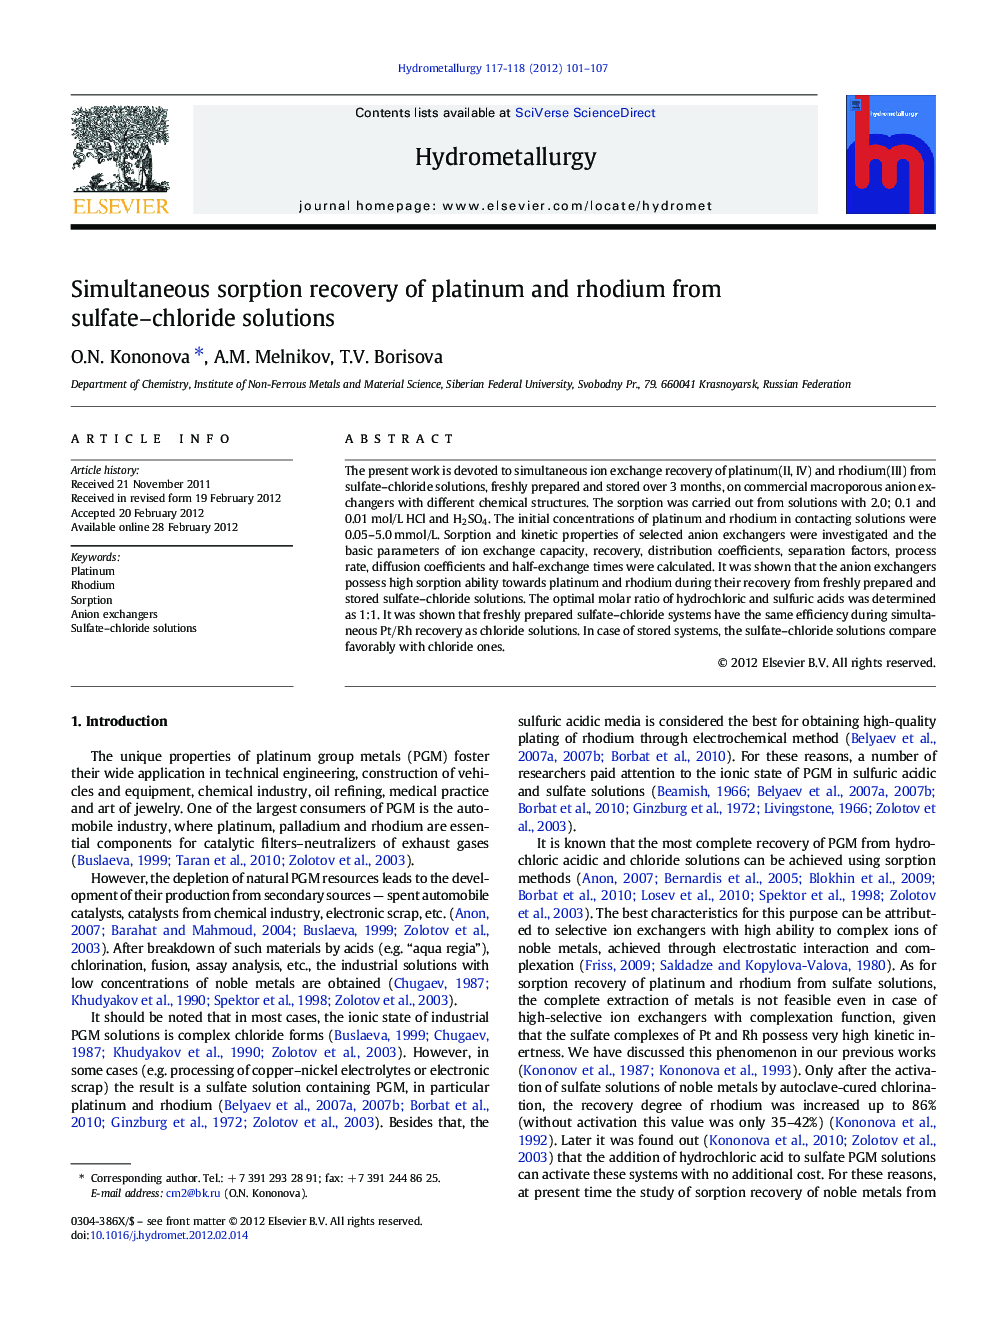 Simultaneous sorption recovery of platinum and rhodium from sulfate–chloride solutions